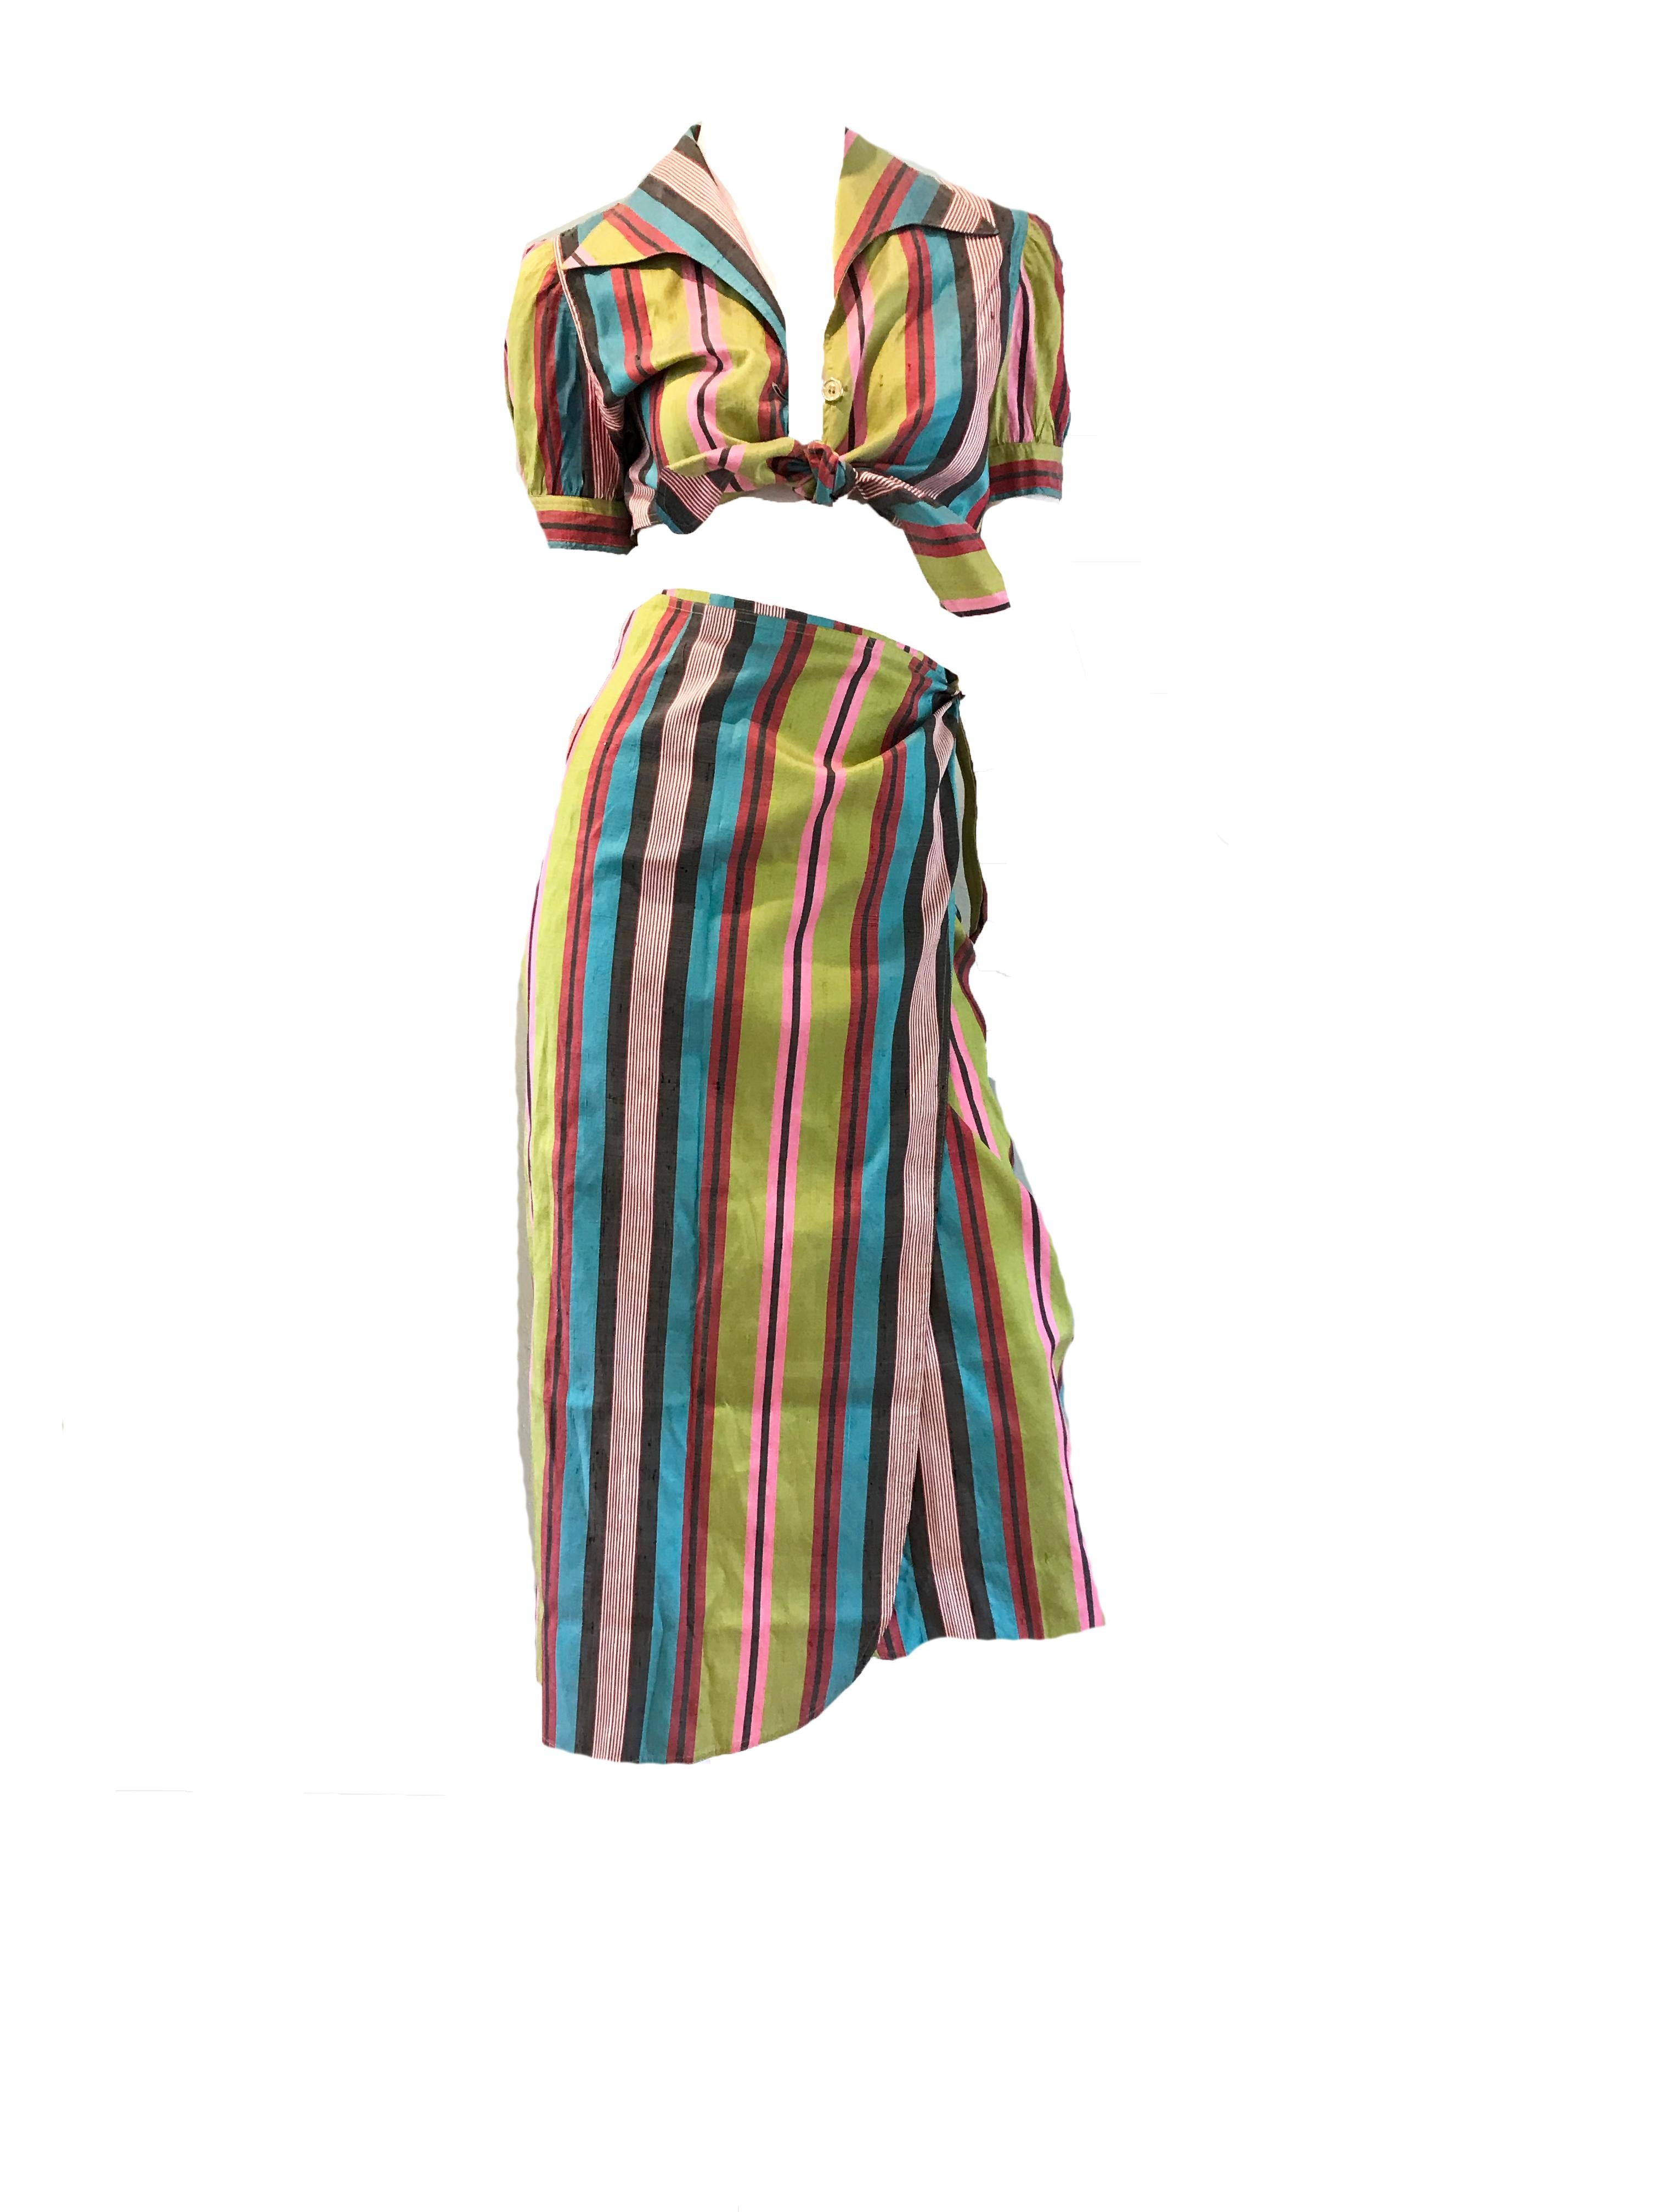 1990s Moschino silk striped cropped tie top and wrap skirt. Condition: Excellent
Size 42/ US 8 / M
30